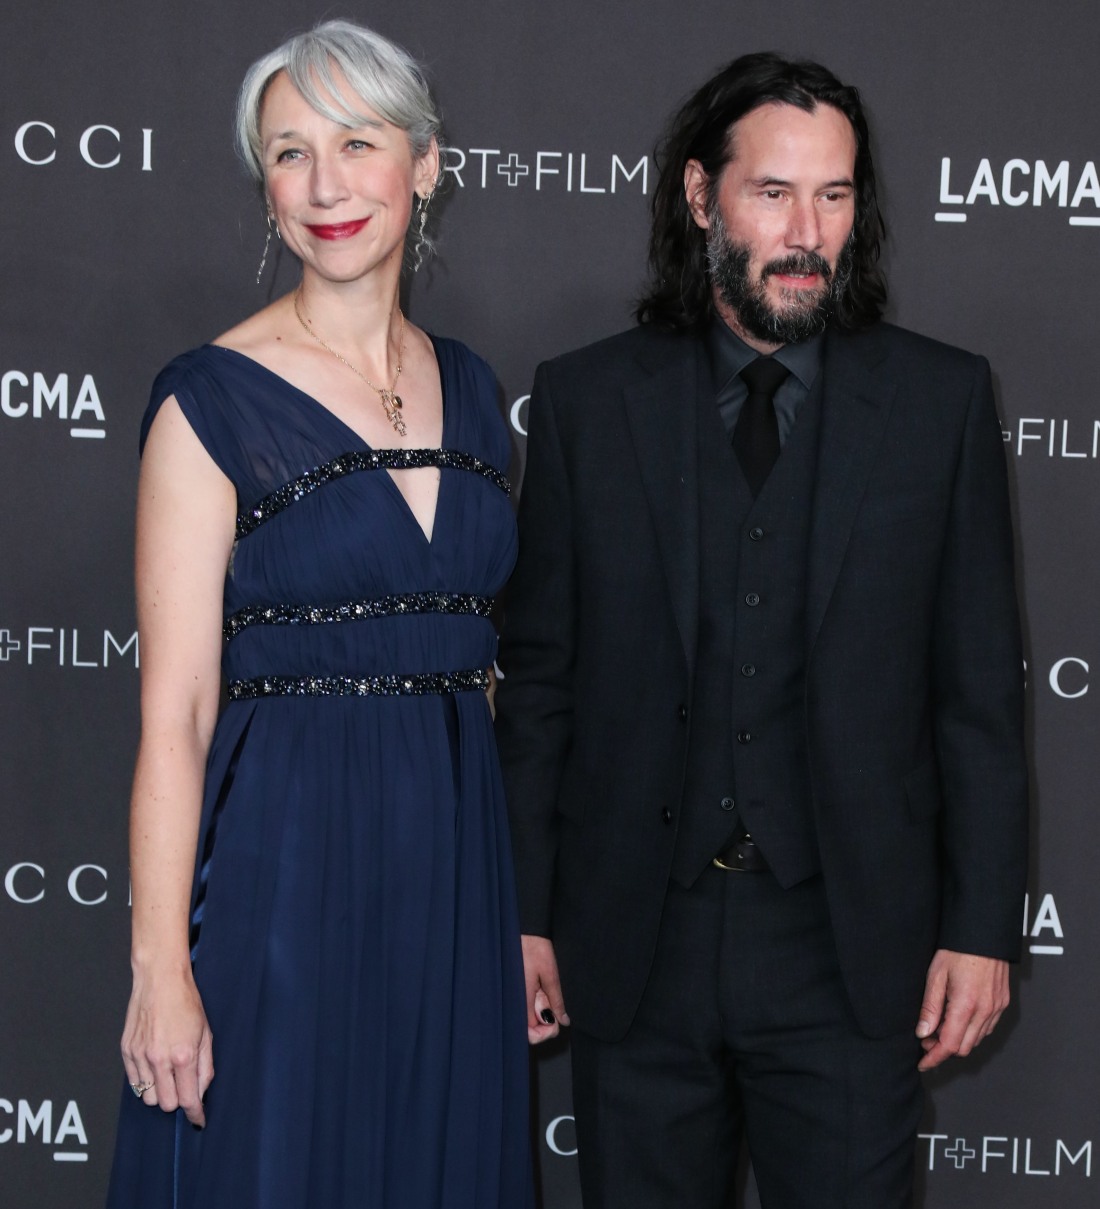 Alexandra Grant and Keanu Reeves arrive at the 2019 LACMA Art + Film Gala held at the Los Angeles County Museum of Art on November 2, 2019 in Los Angeles, California, United States.